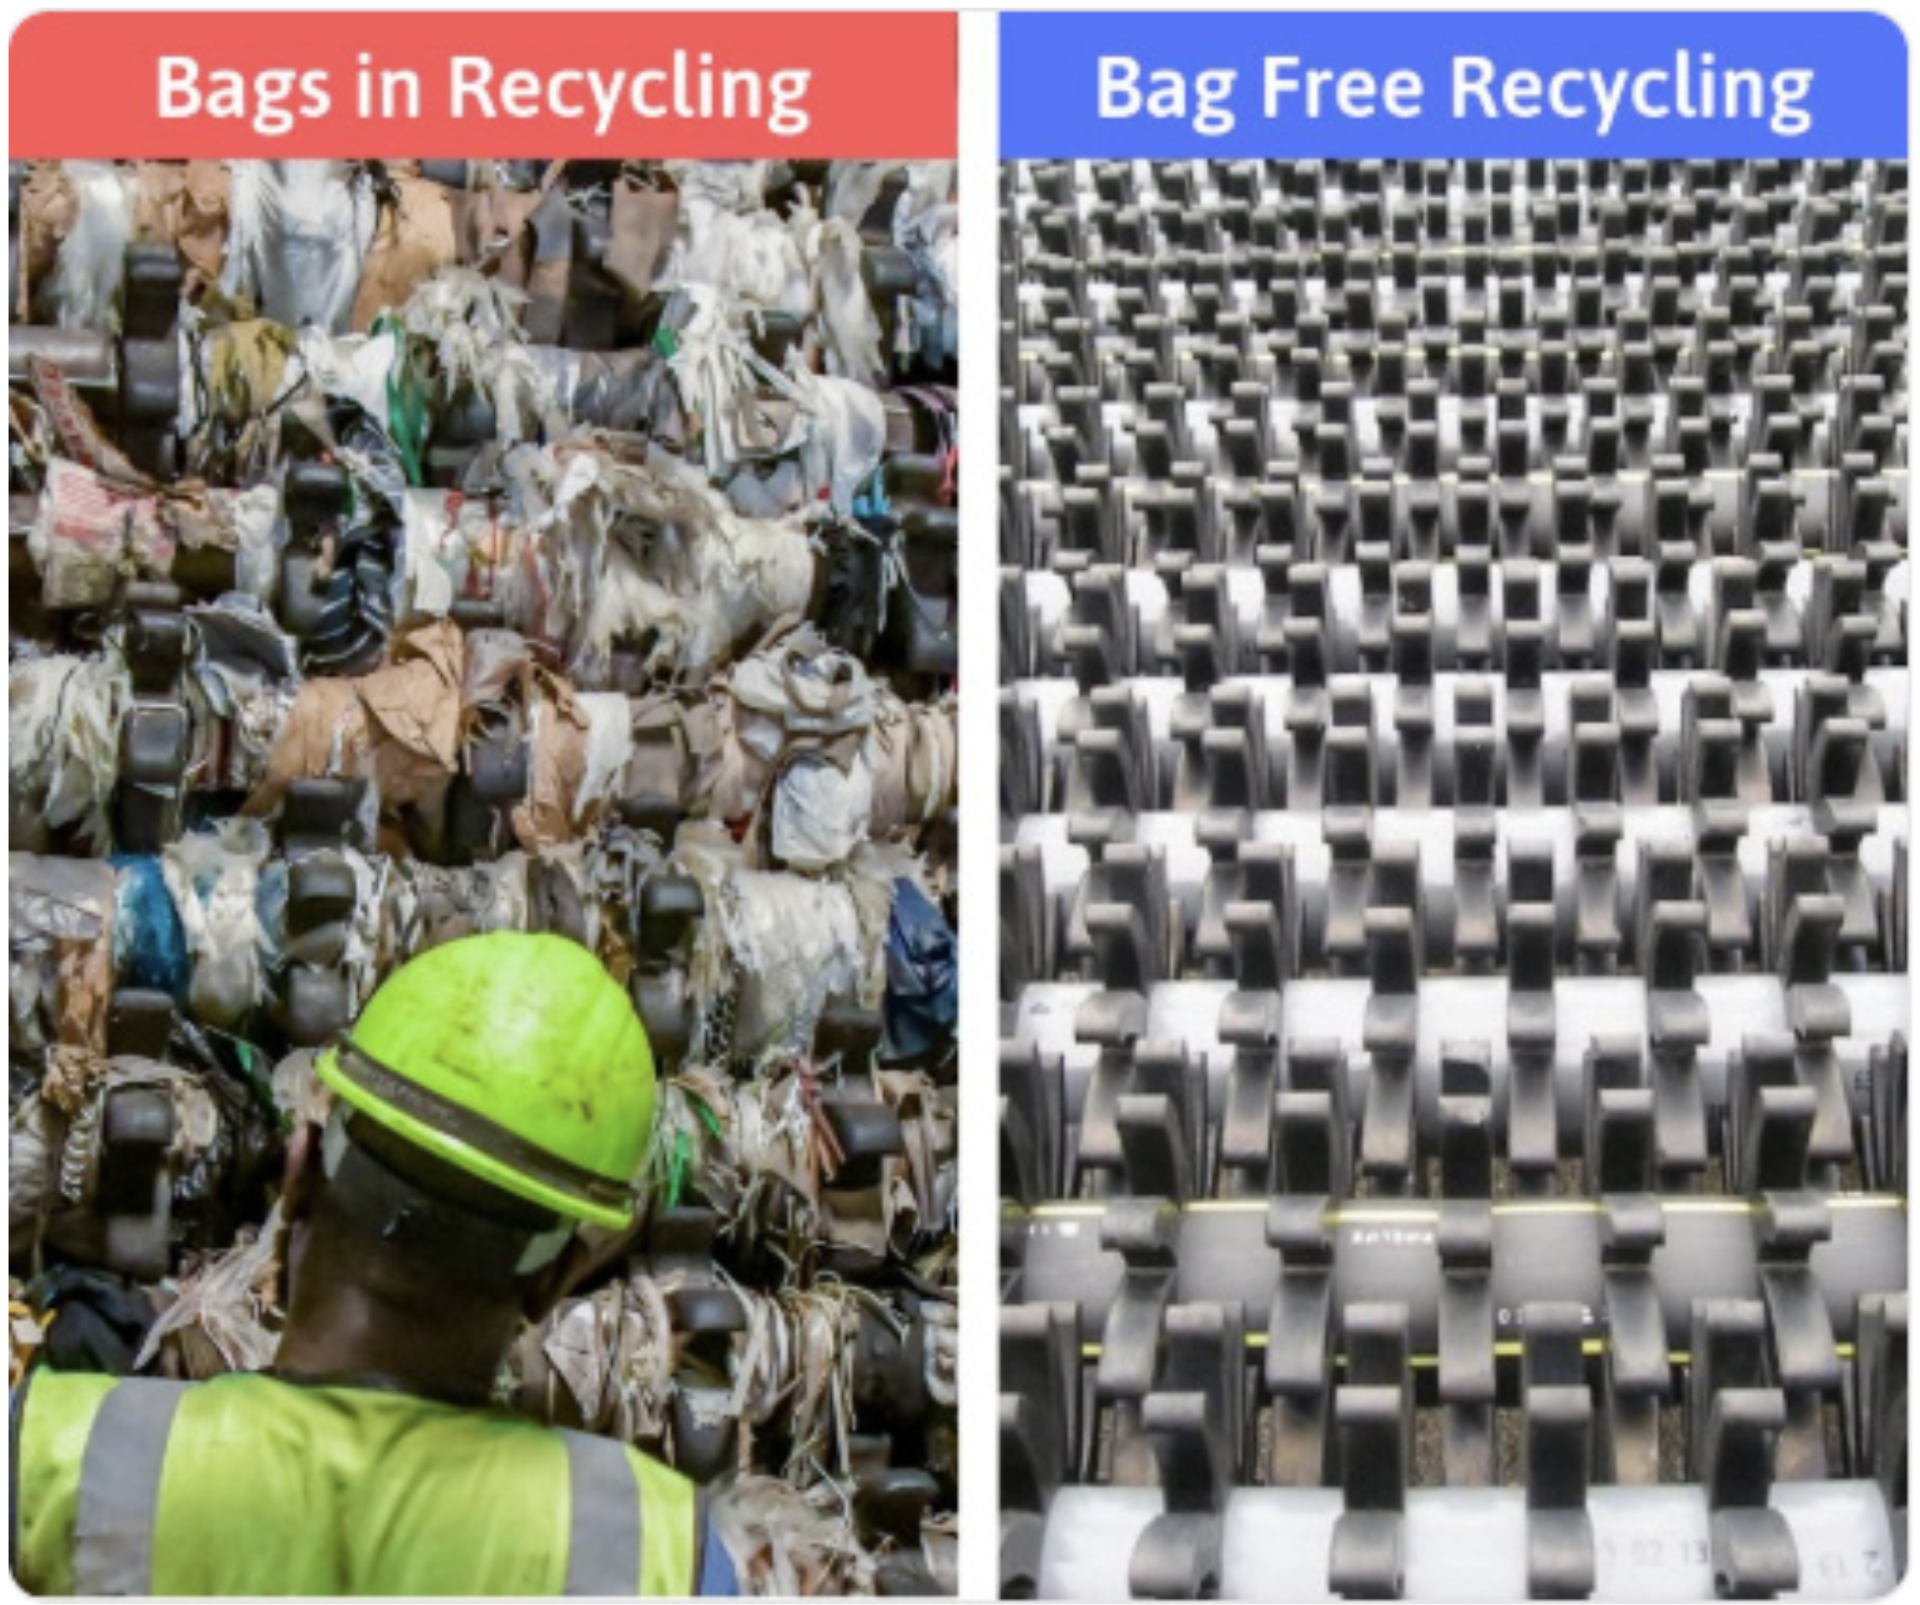 Bags in recycling machines